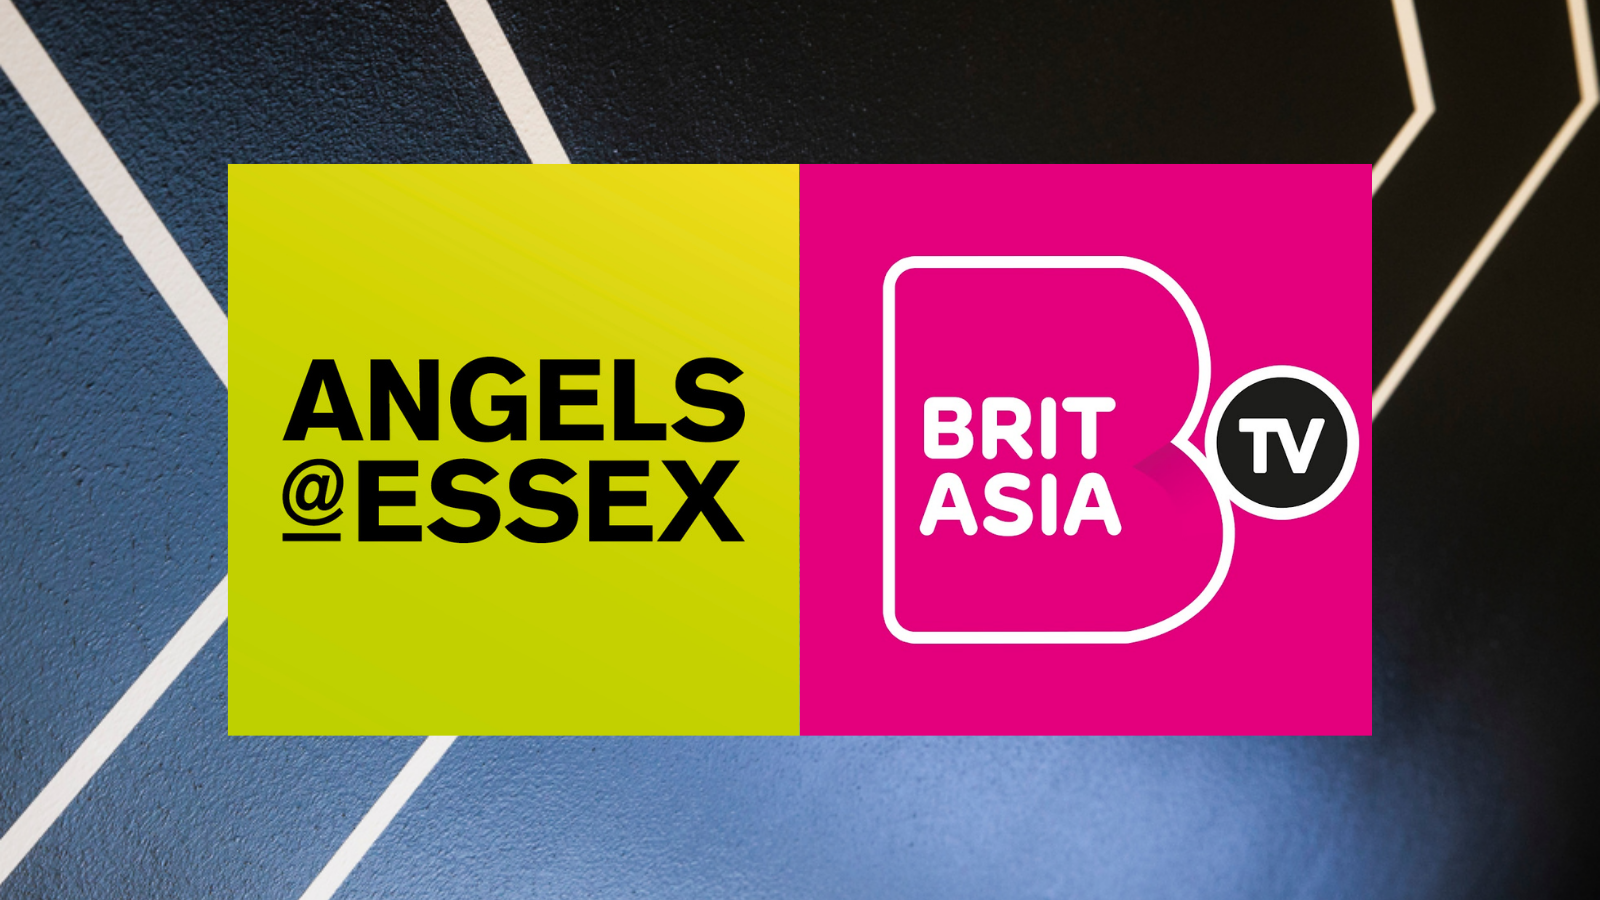 Brit Asia TV returns to Essex for Pitch It Day